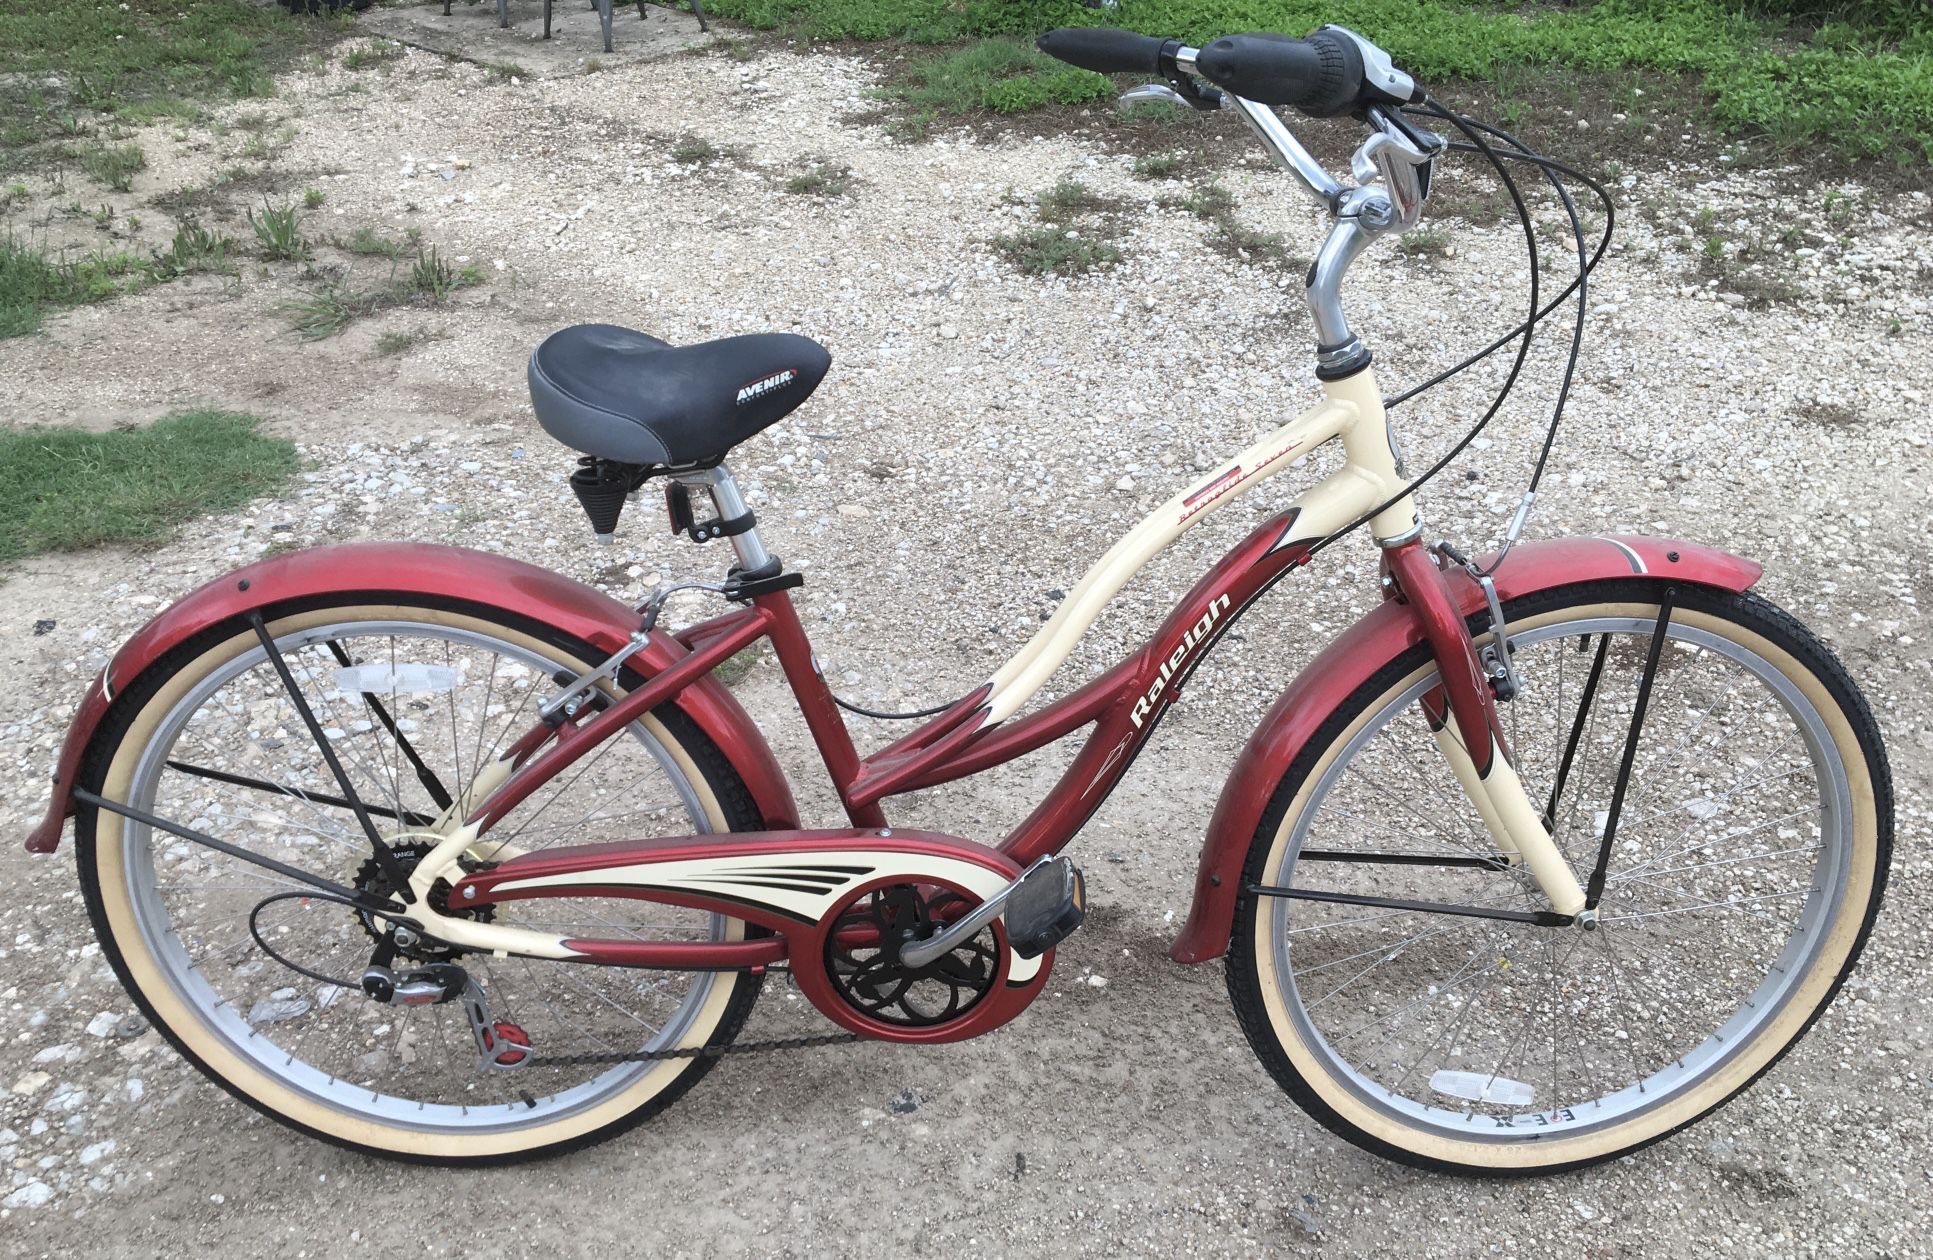  Raleigh 26 Inch Super Cruiser Retro Glide 7 Girl’s Bicycle 